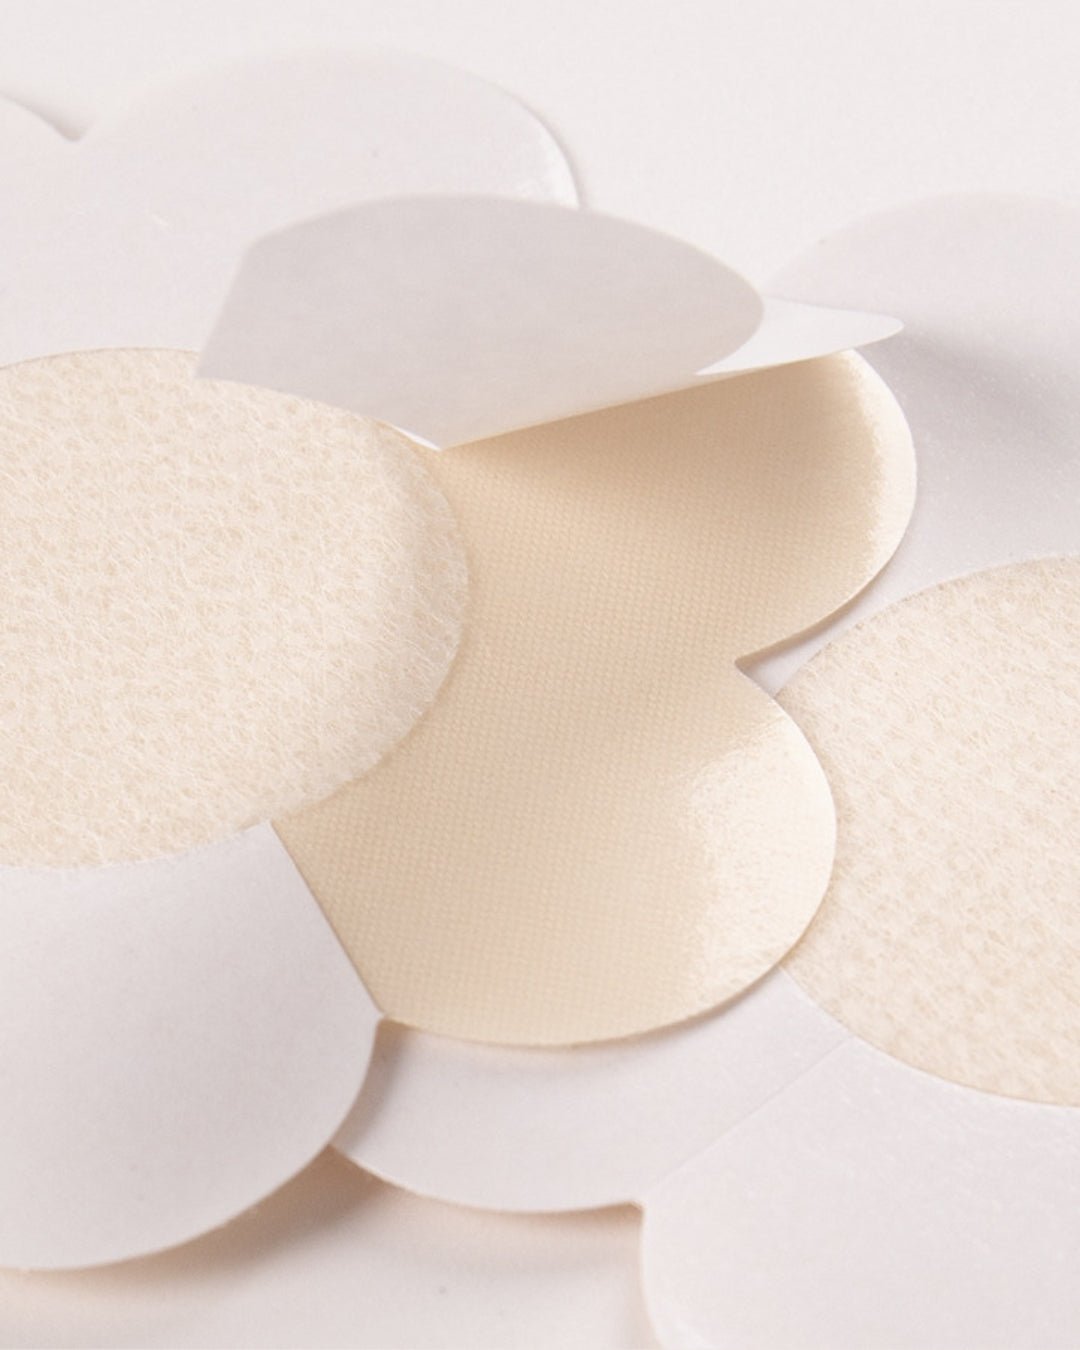 Invisible Nipple Covers - CreamFlower Petals - Seamless Lingerie